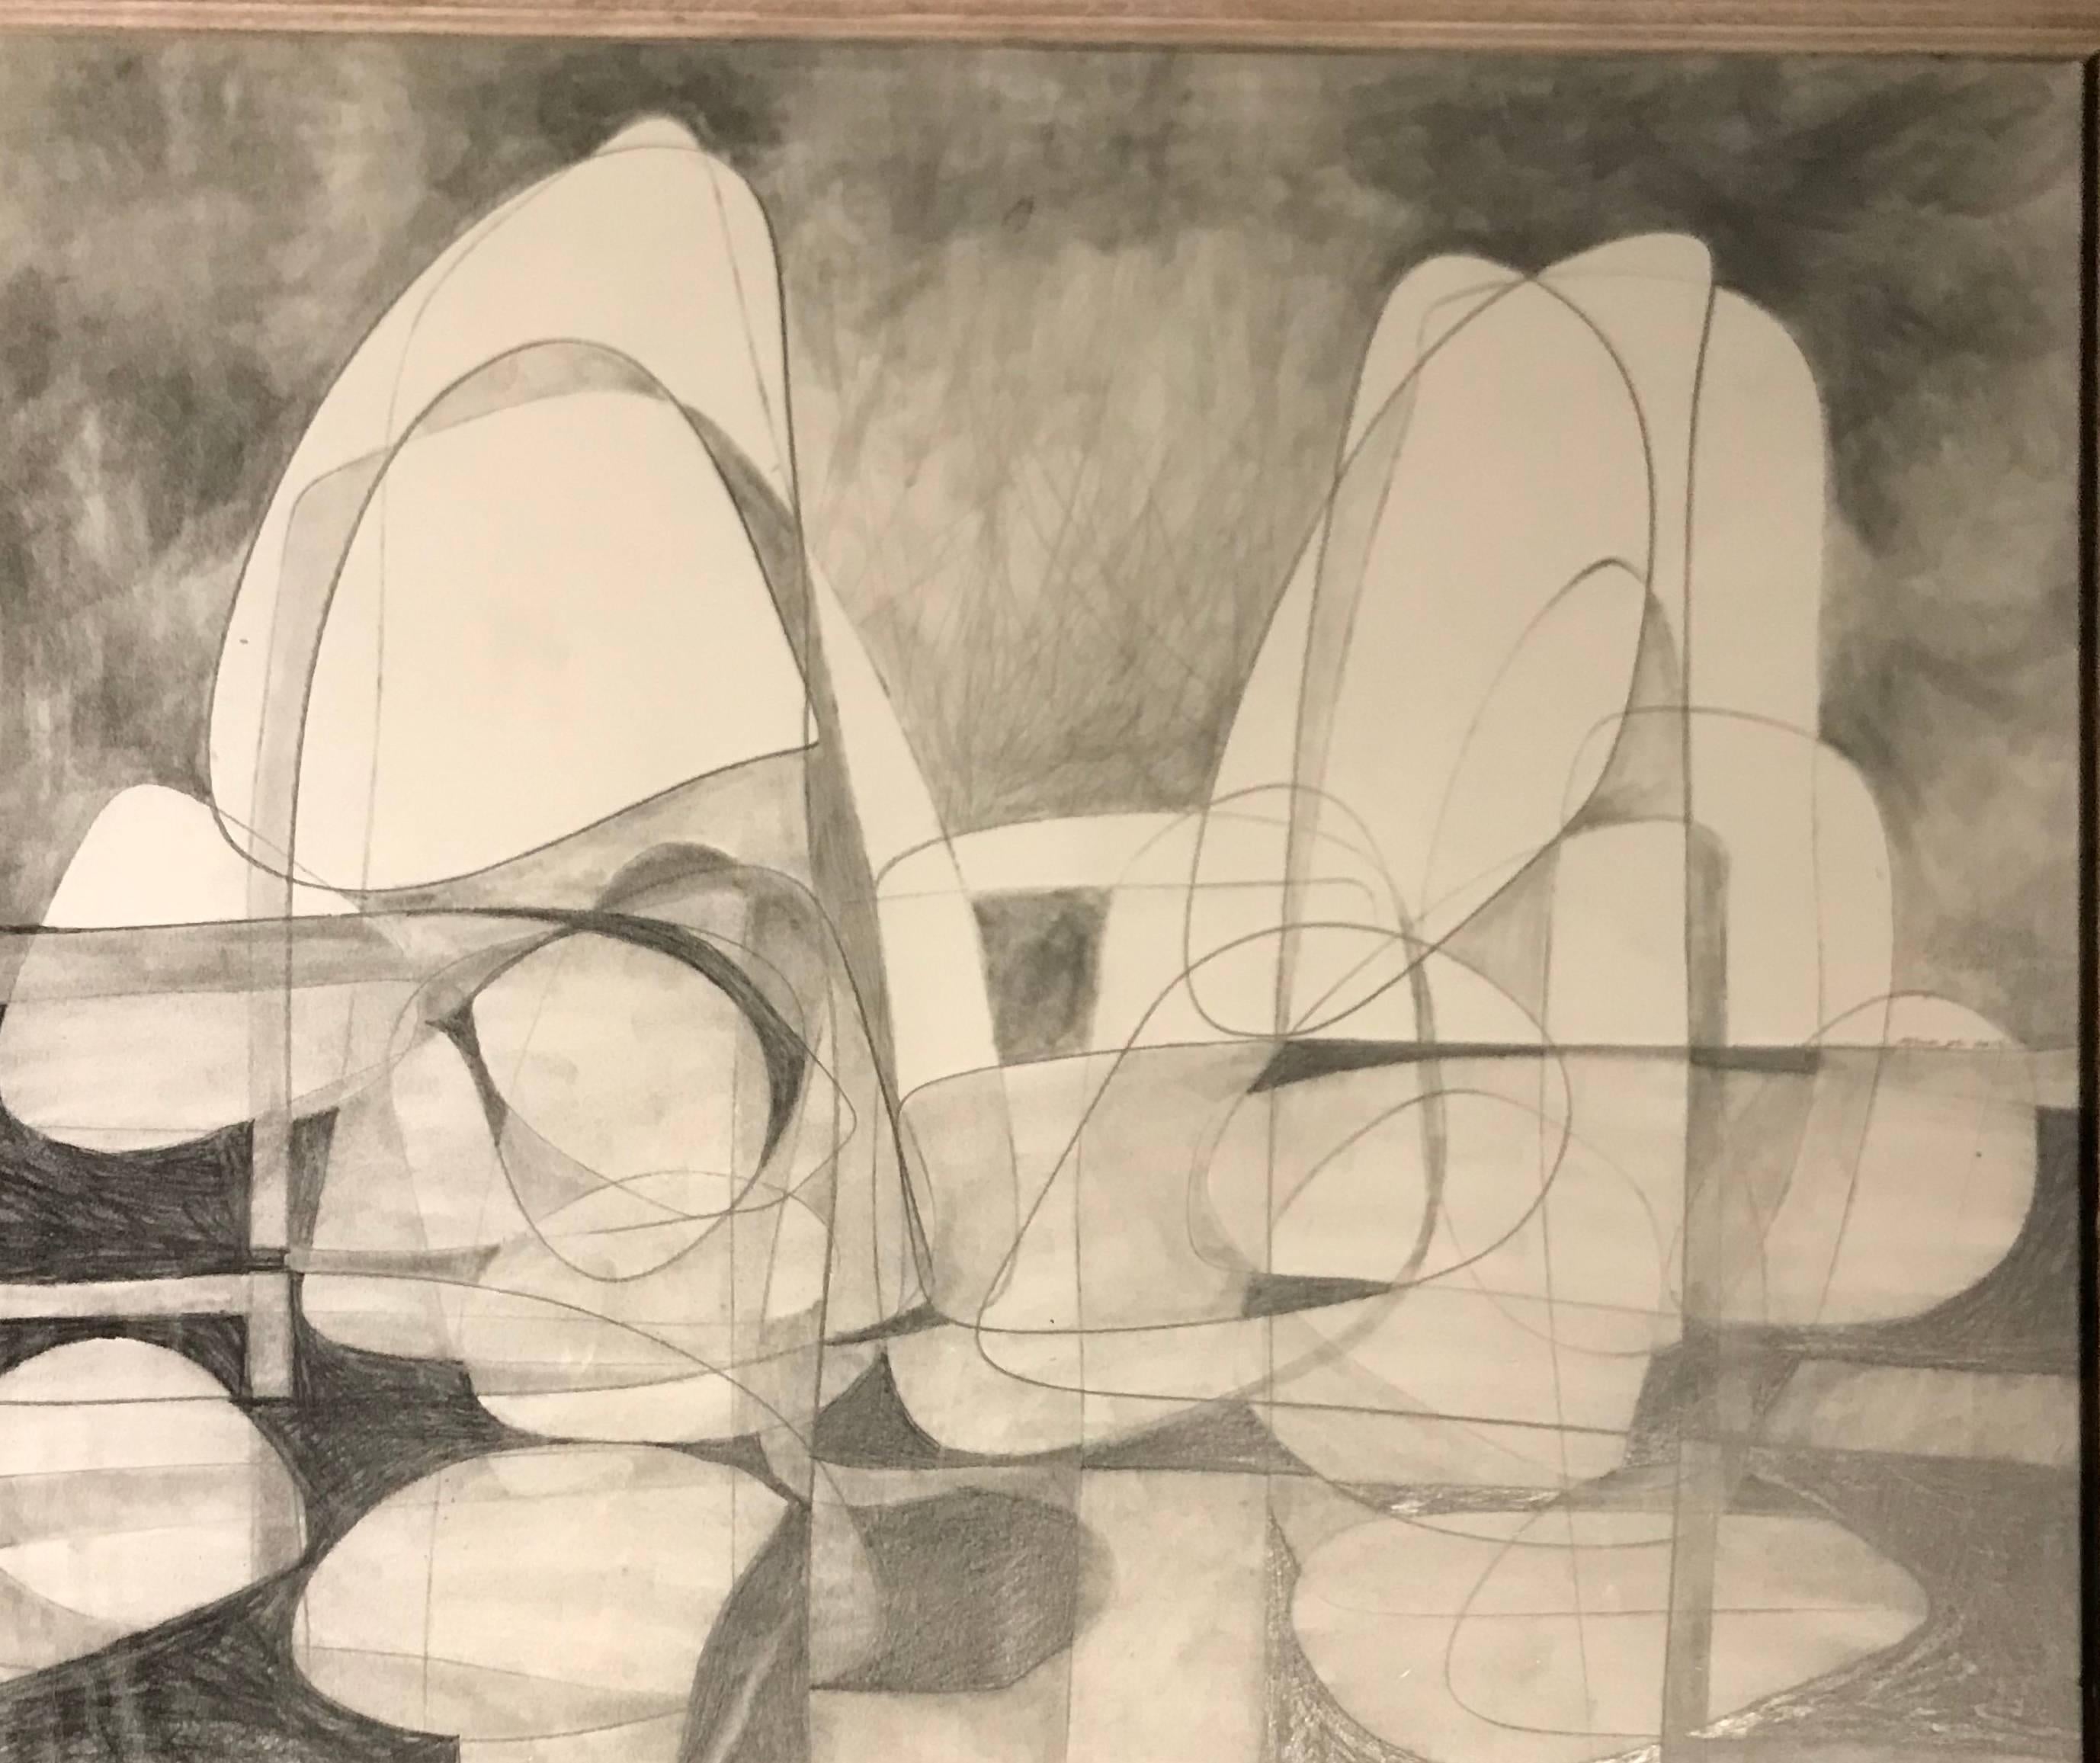 Contemporary original abstract charcoal drawing by American artist David Dew Bruner.
Inspired by the artist Graham Sutherland.
This is one of many pieces from a large body of works.
Vintage bleached oak frame.